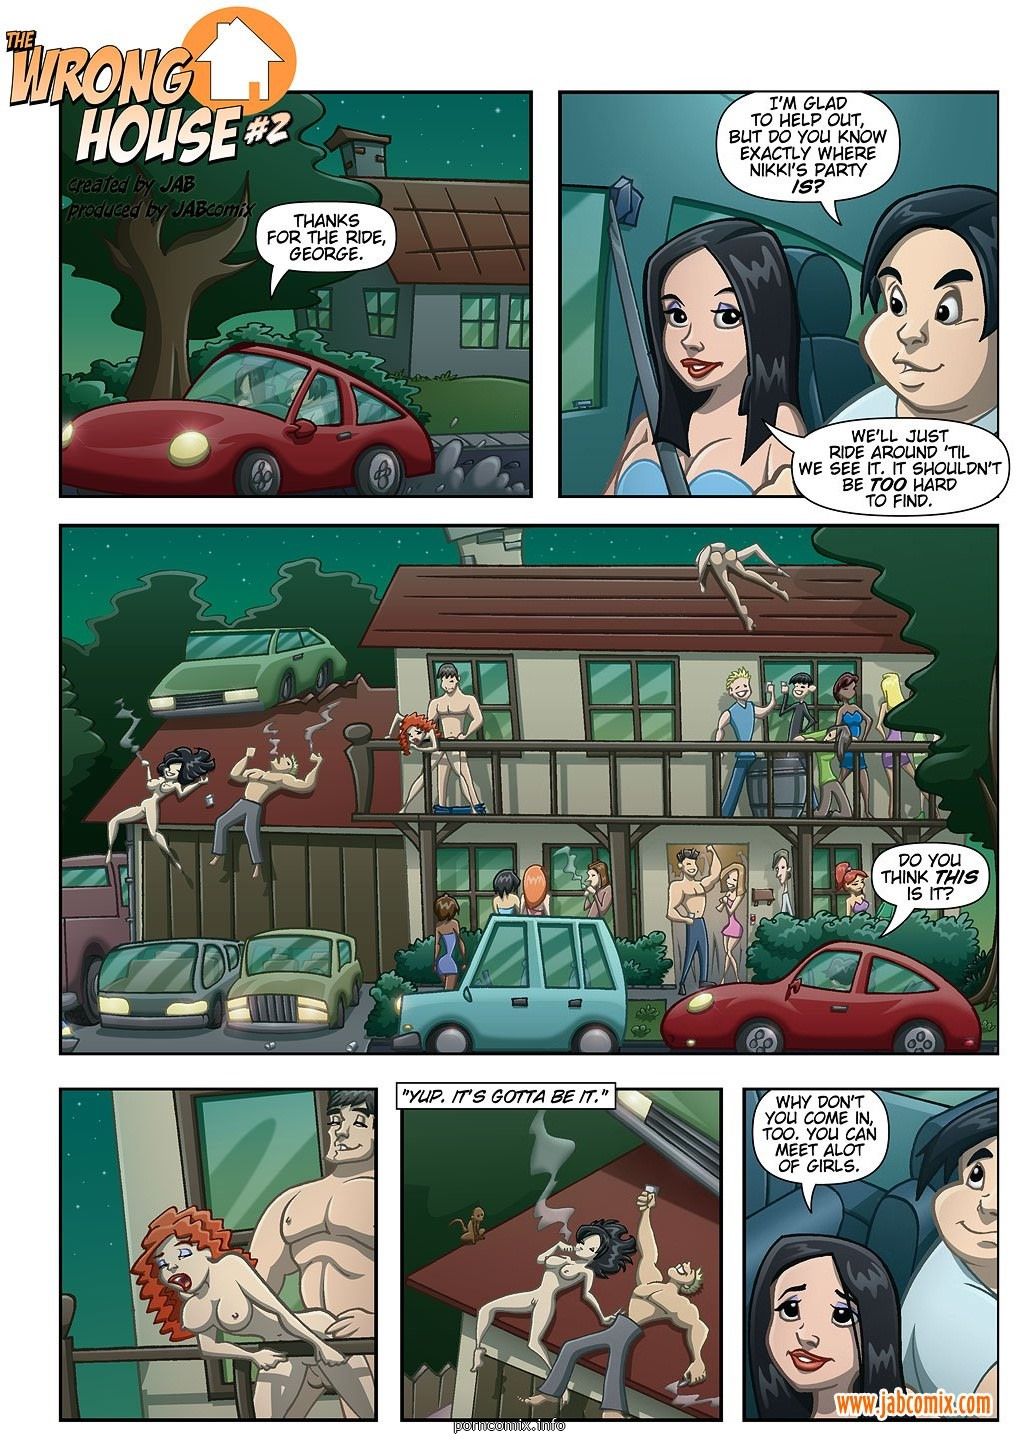 The Wrong House 1-2, Jab Comix page 11